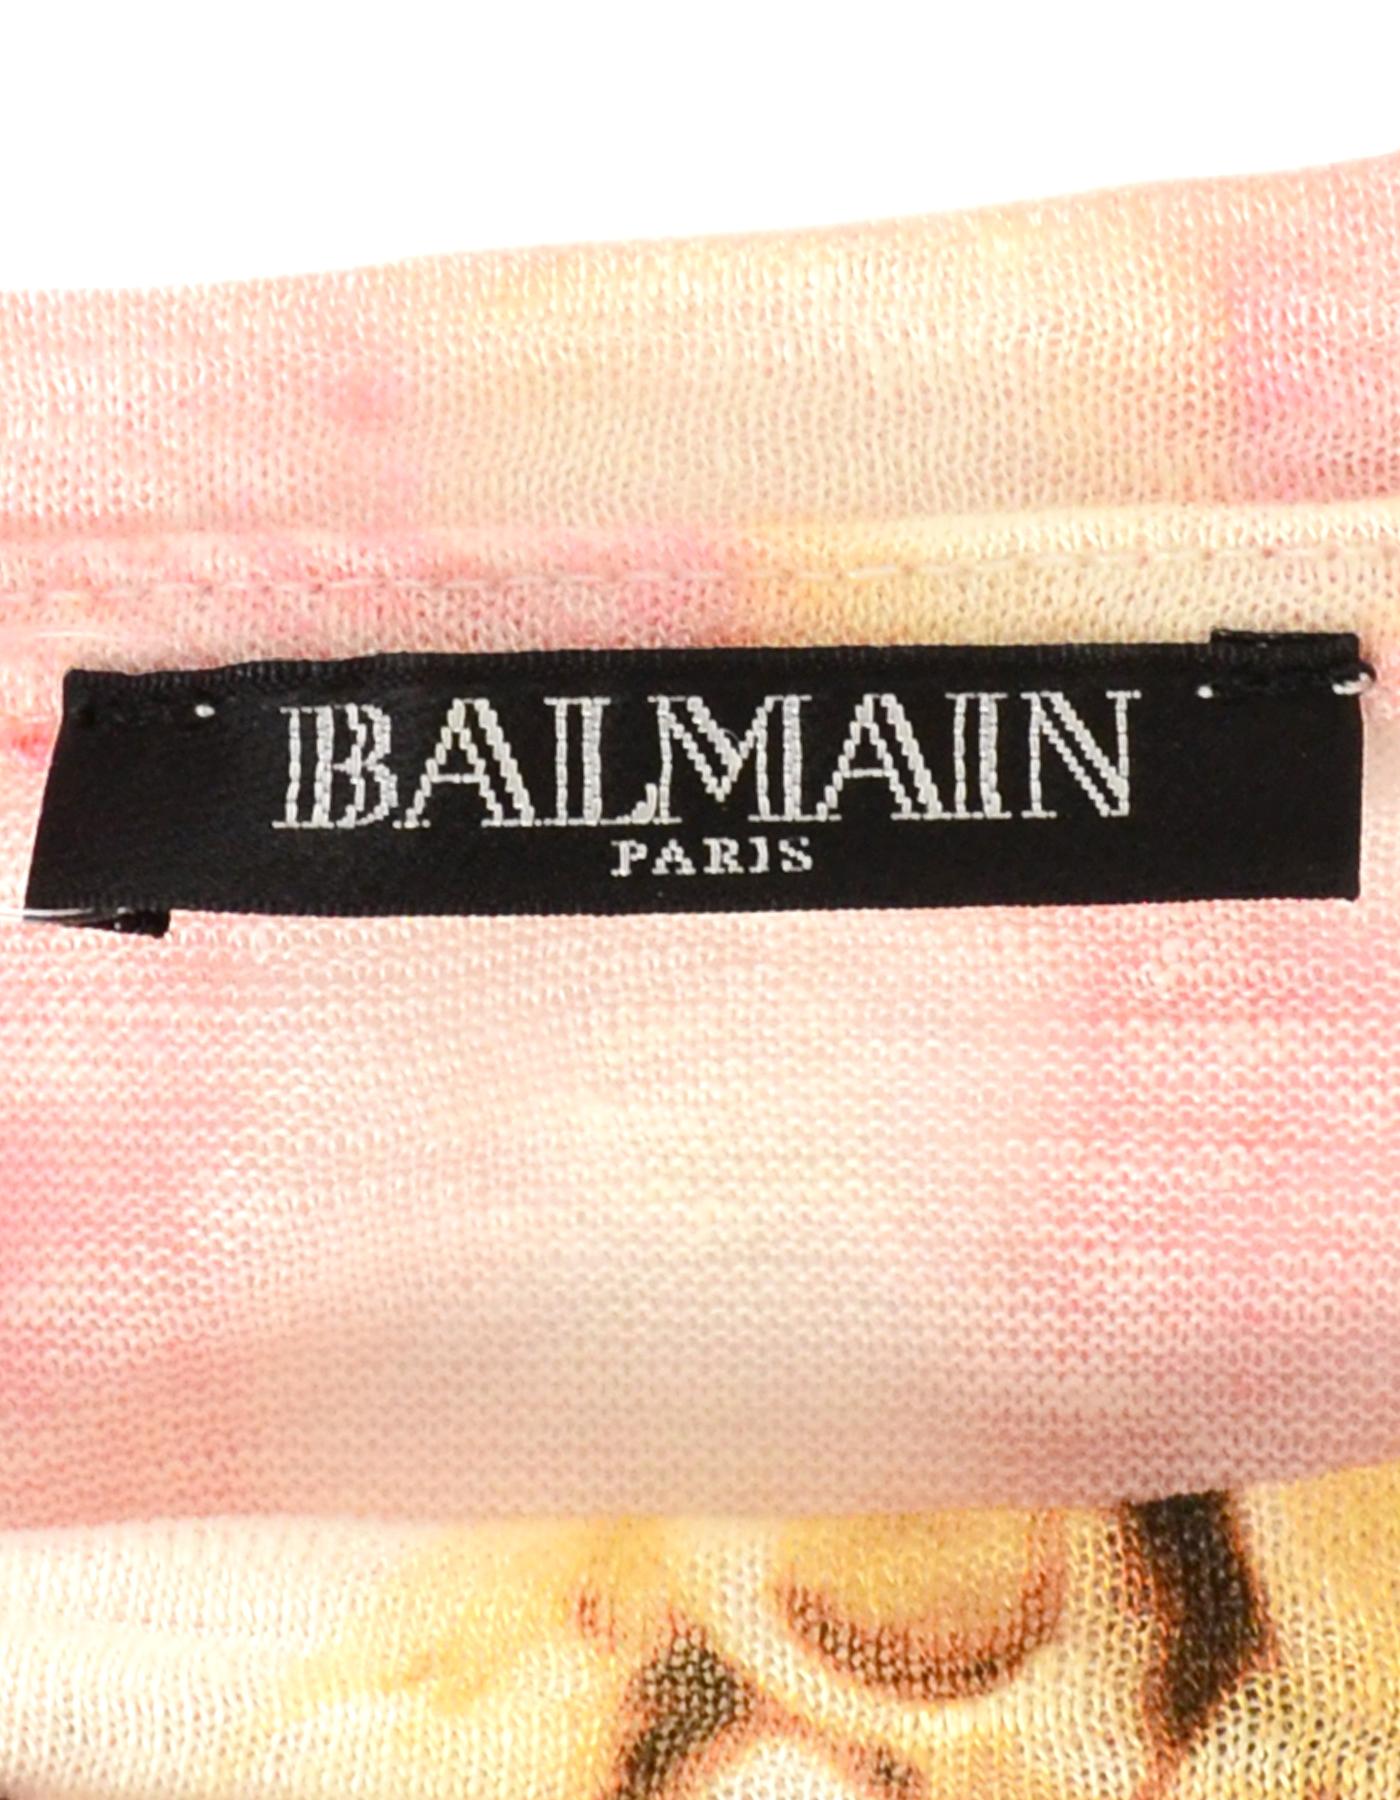  Balmain Pink Sleeveless Printed Linen Top w. Gold Lion Buttons

Made In: France
Color: Pink/ white
Materials: 100% linen
Opening/Closure: Pull over
Overall Condition: Excellent pre-owned condition

Tag Size: FR42/US10 *Please refer to measurements